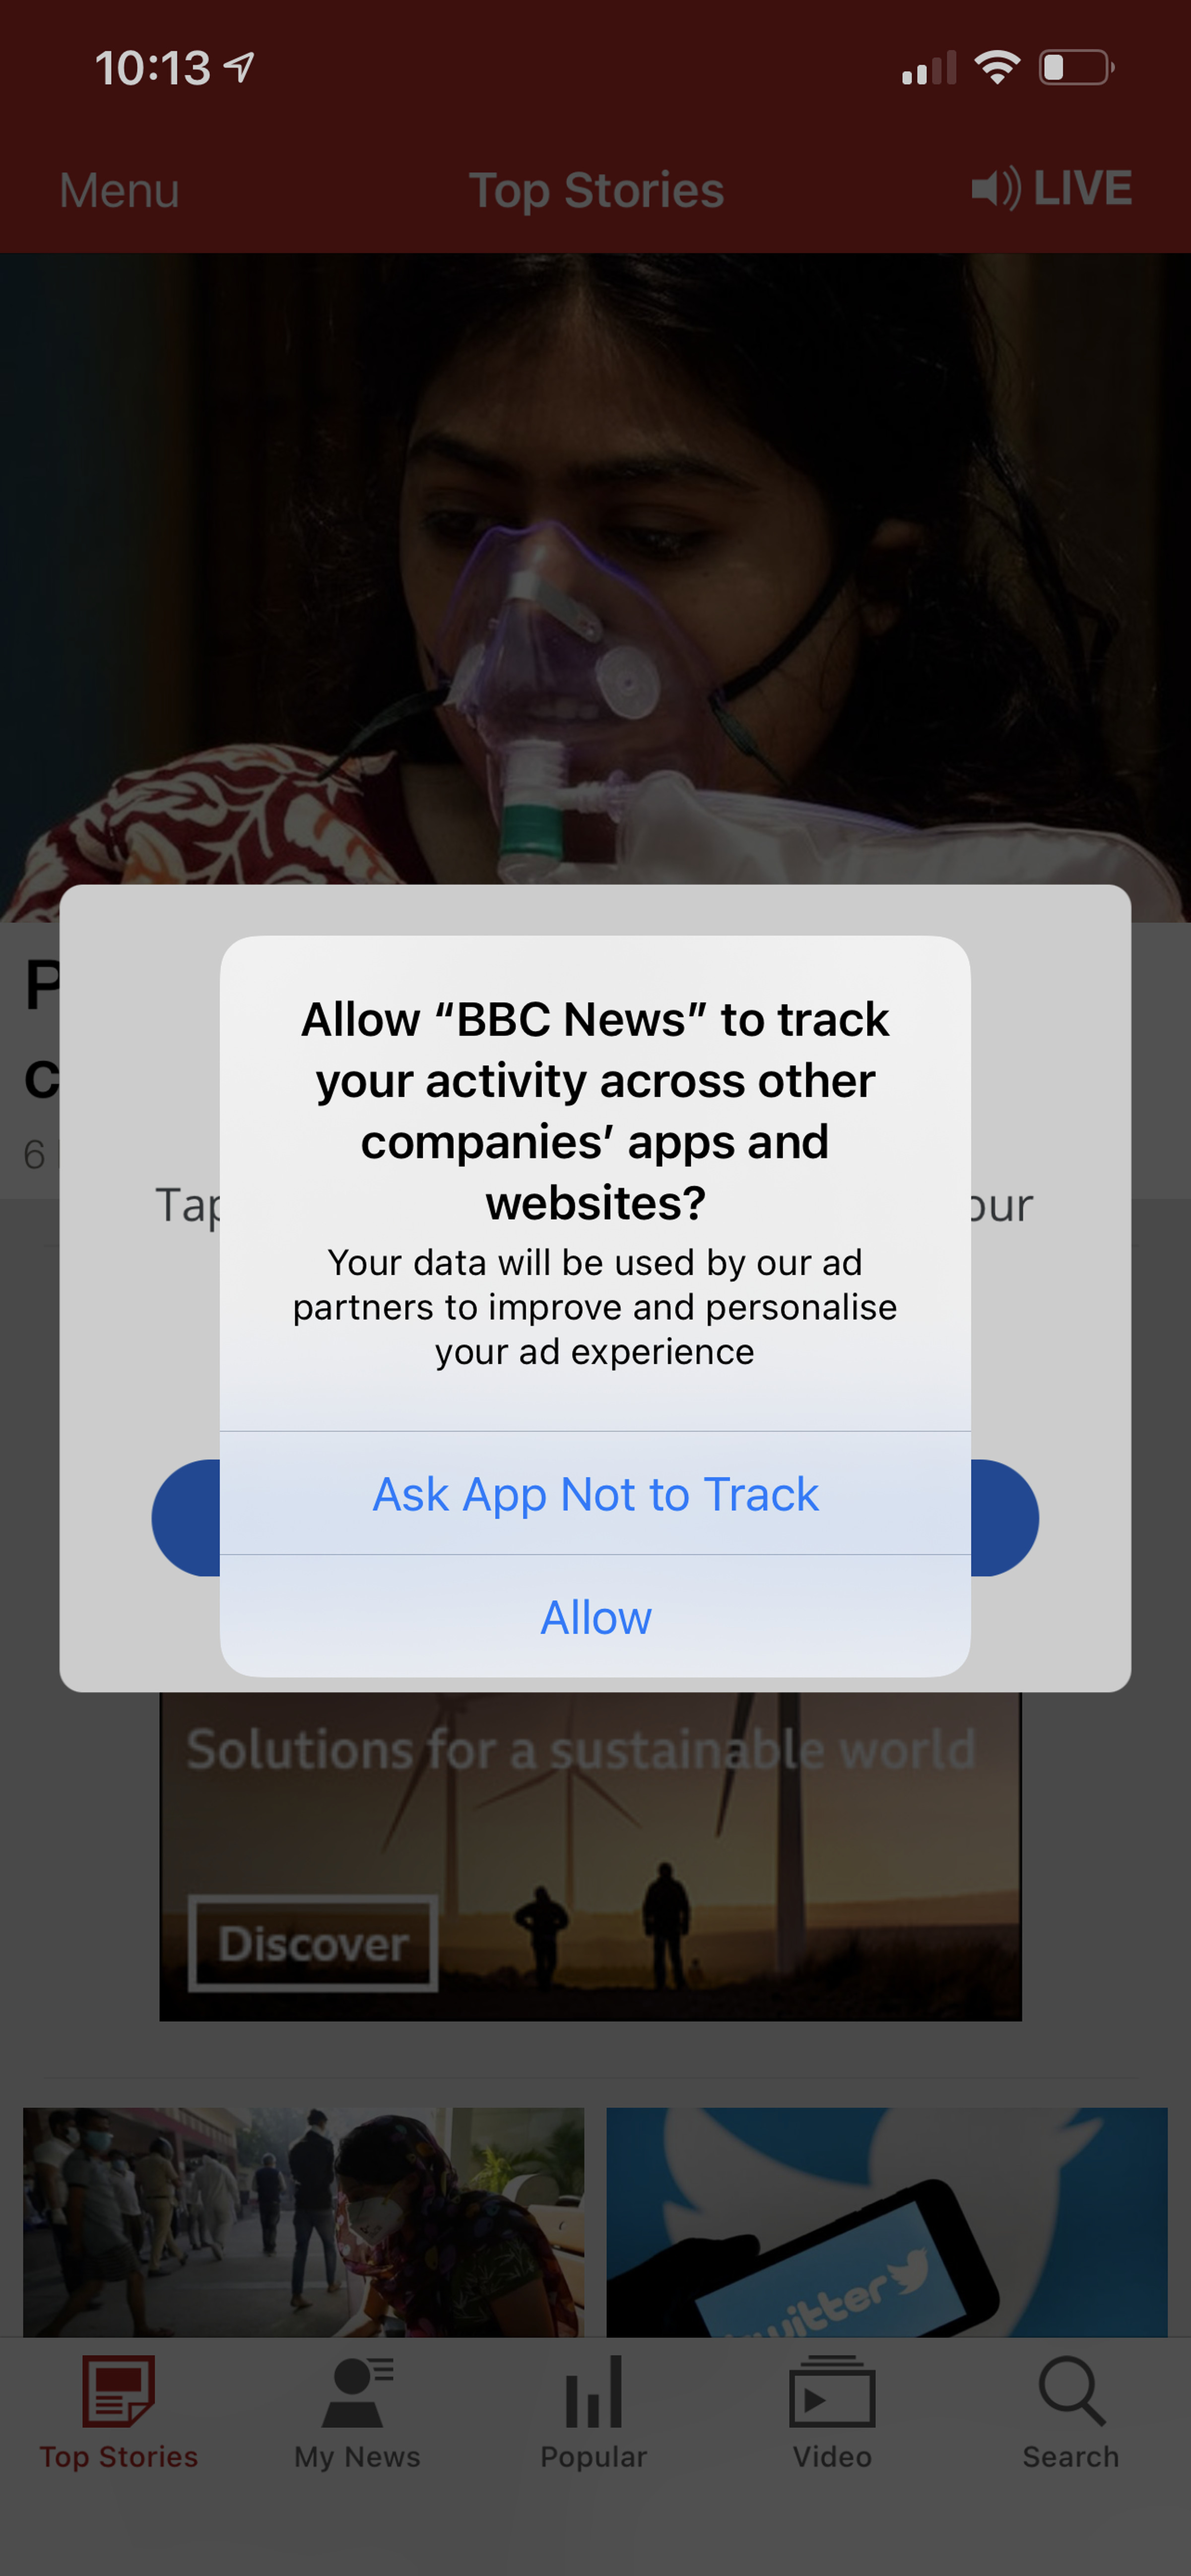 It’s up to you now whether to allow each app to track you or not.